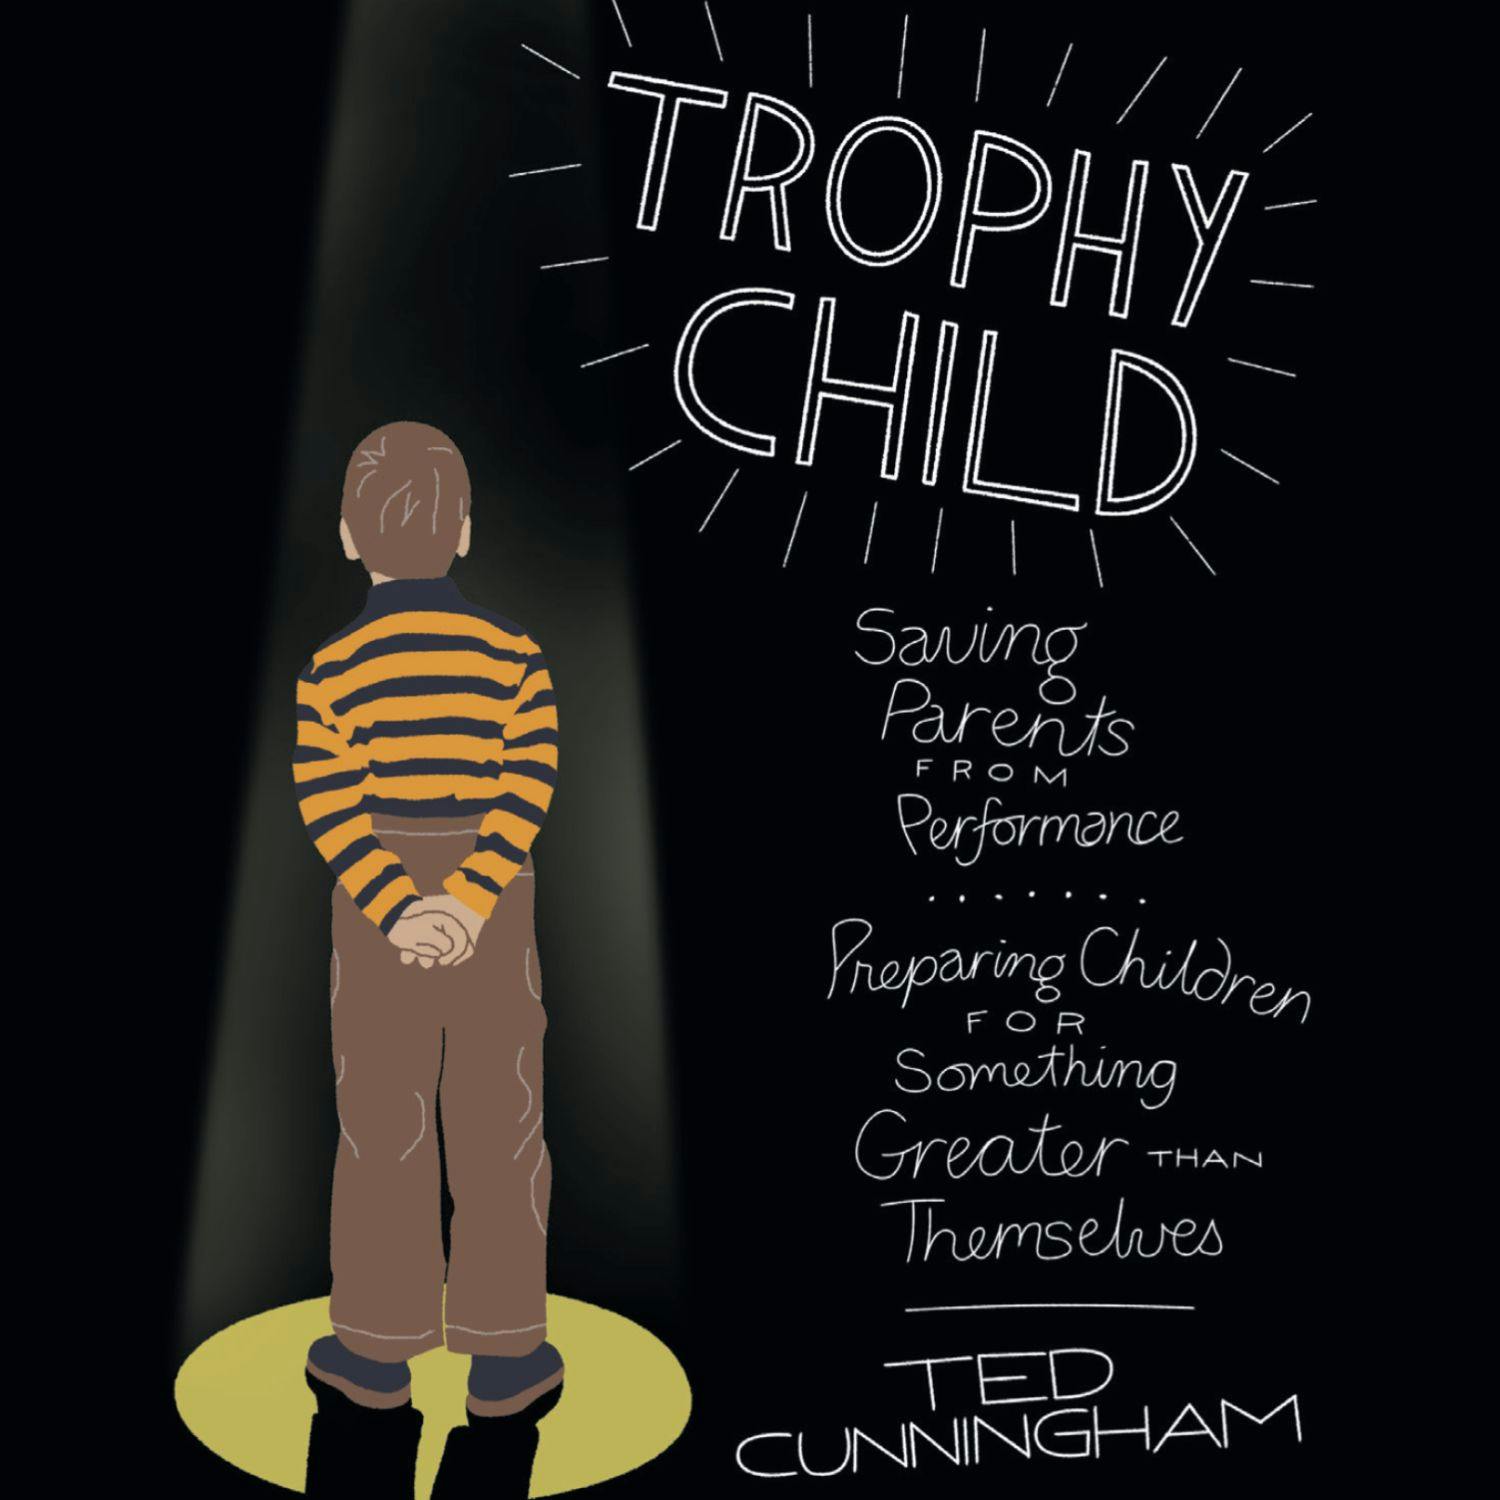 Trophy Child: Saving Parents from Performance, Preparing Children for Something Greater Than Themselves - Ted Cunningham